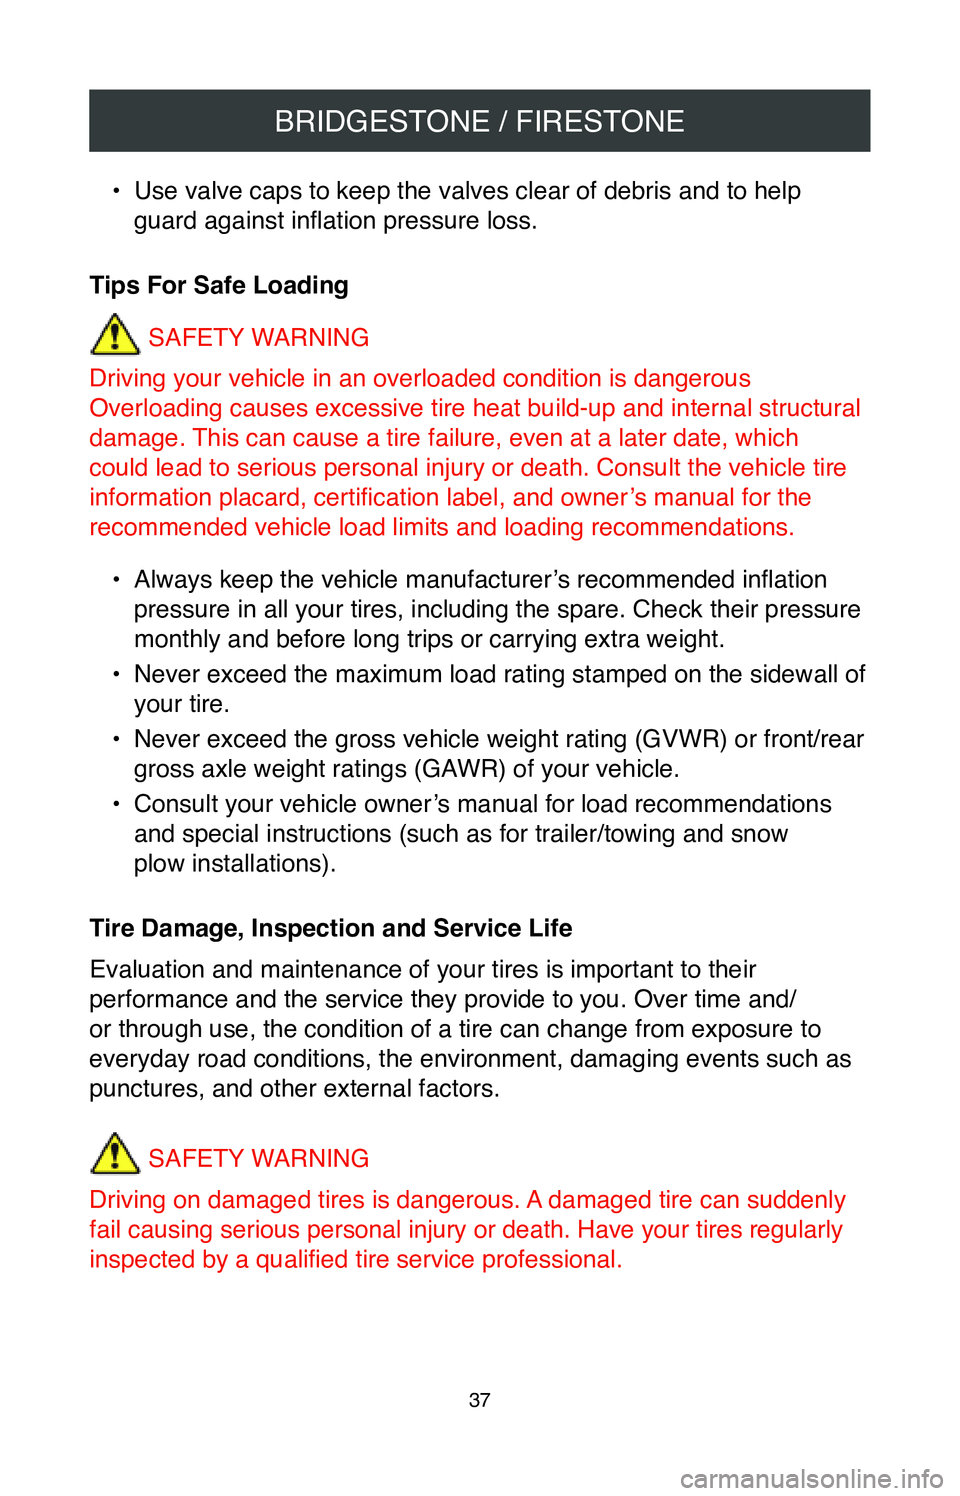 TOYOTA LAND CRUISER 2020  Warranties & Maintenance Guides (in English) BRIDGESTONE / FIRESTONE
37
• Use valve caps to keep the valves clear of debris and to help 
guard against inflation pressure loss.
Tips For Safe Loading SAFETY WARNING
Driving your vehicle in an ove